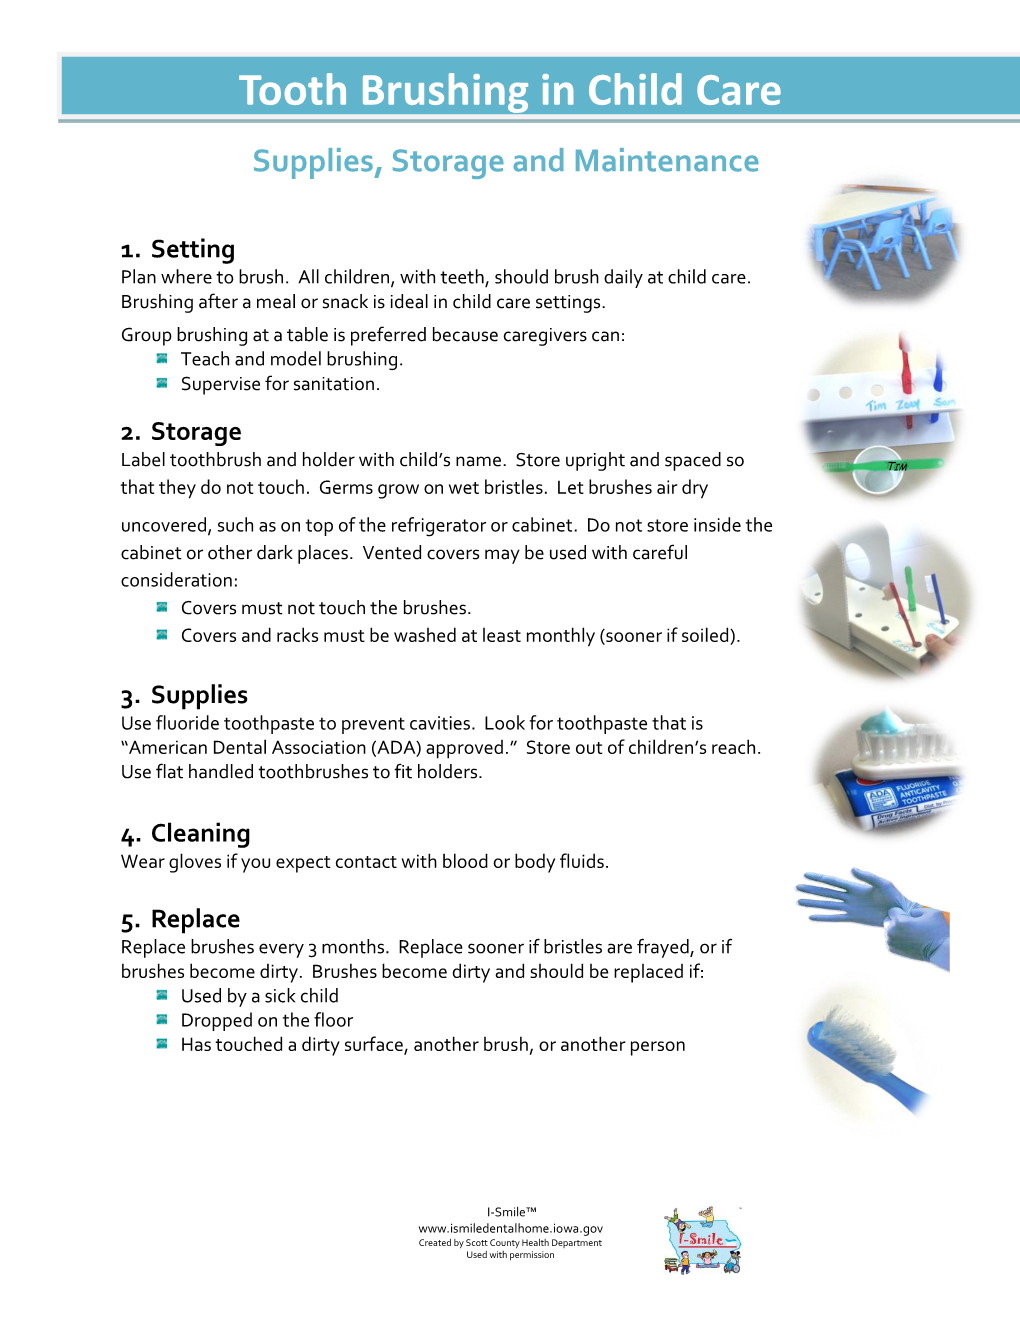 Tooth Brushing in Child Care Supplies, Storage and Maintenance